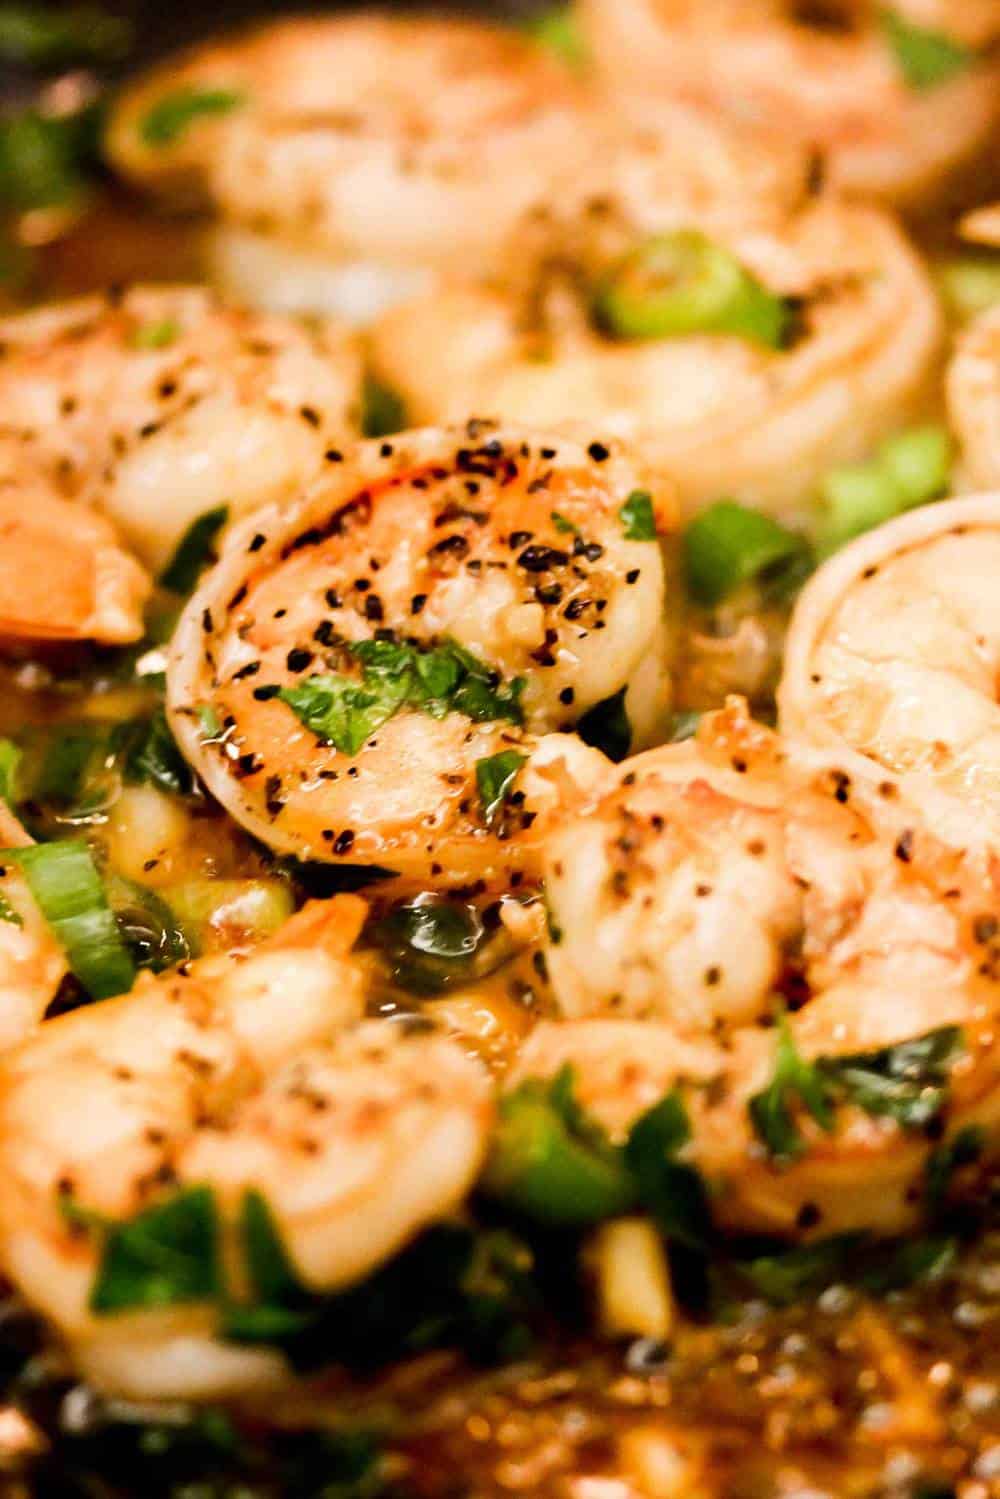 Southern Shrimp and Cheesy Grits recipe